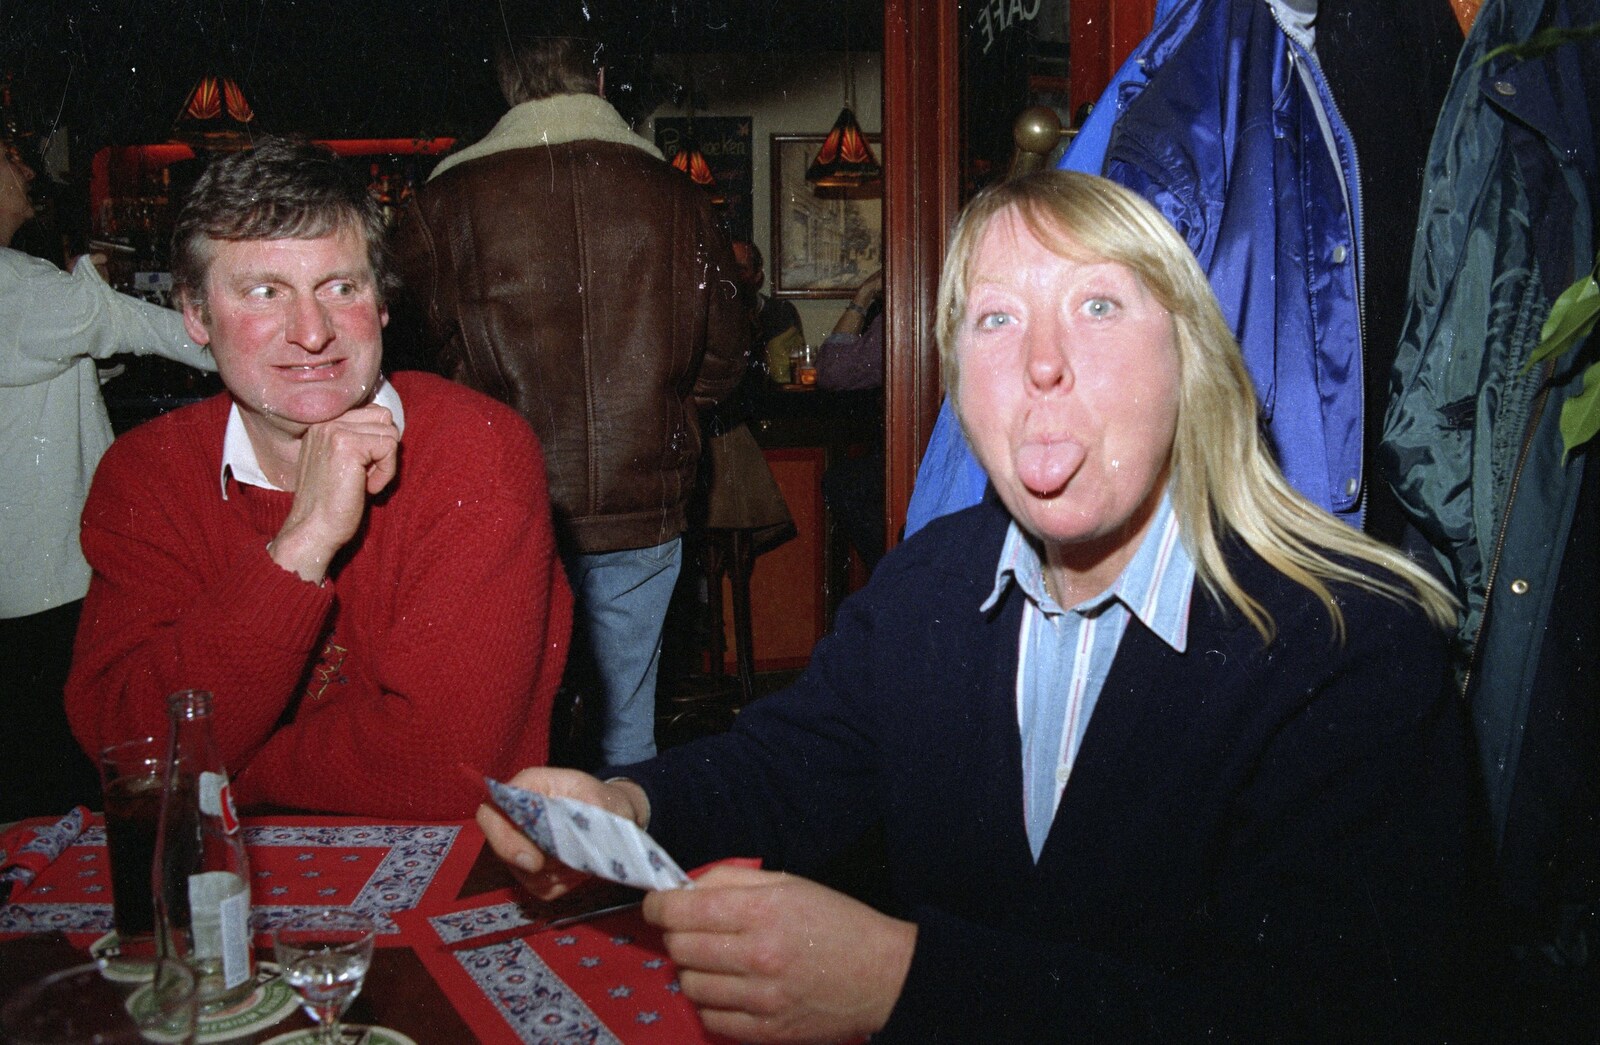 Out and About in Amsterdam, Hoorne, Vollendam and Edam, The Netherlands - 26th March 1992: Sue sticks her tongue out